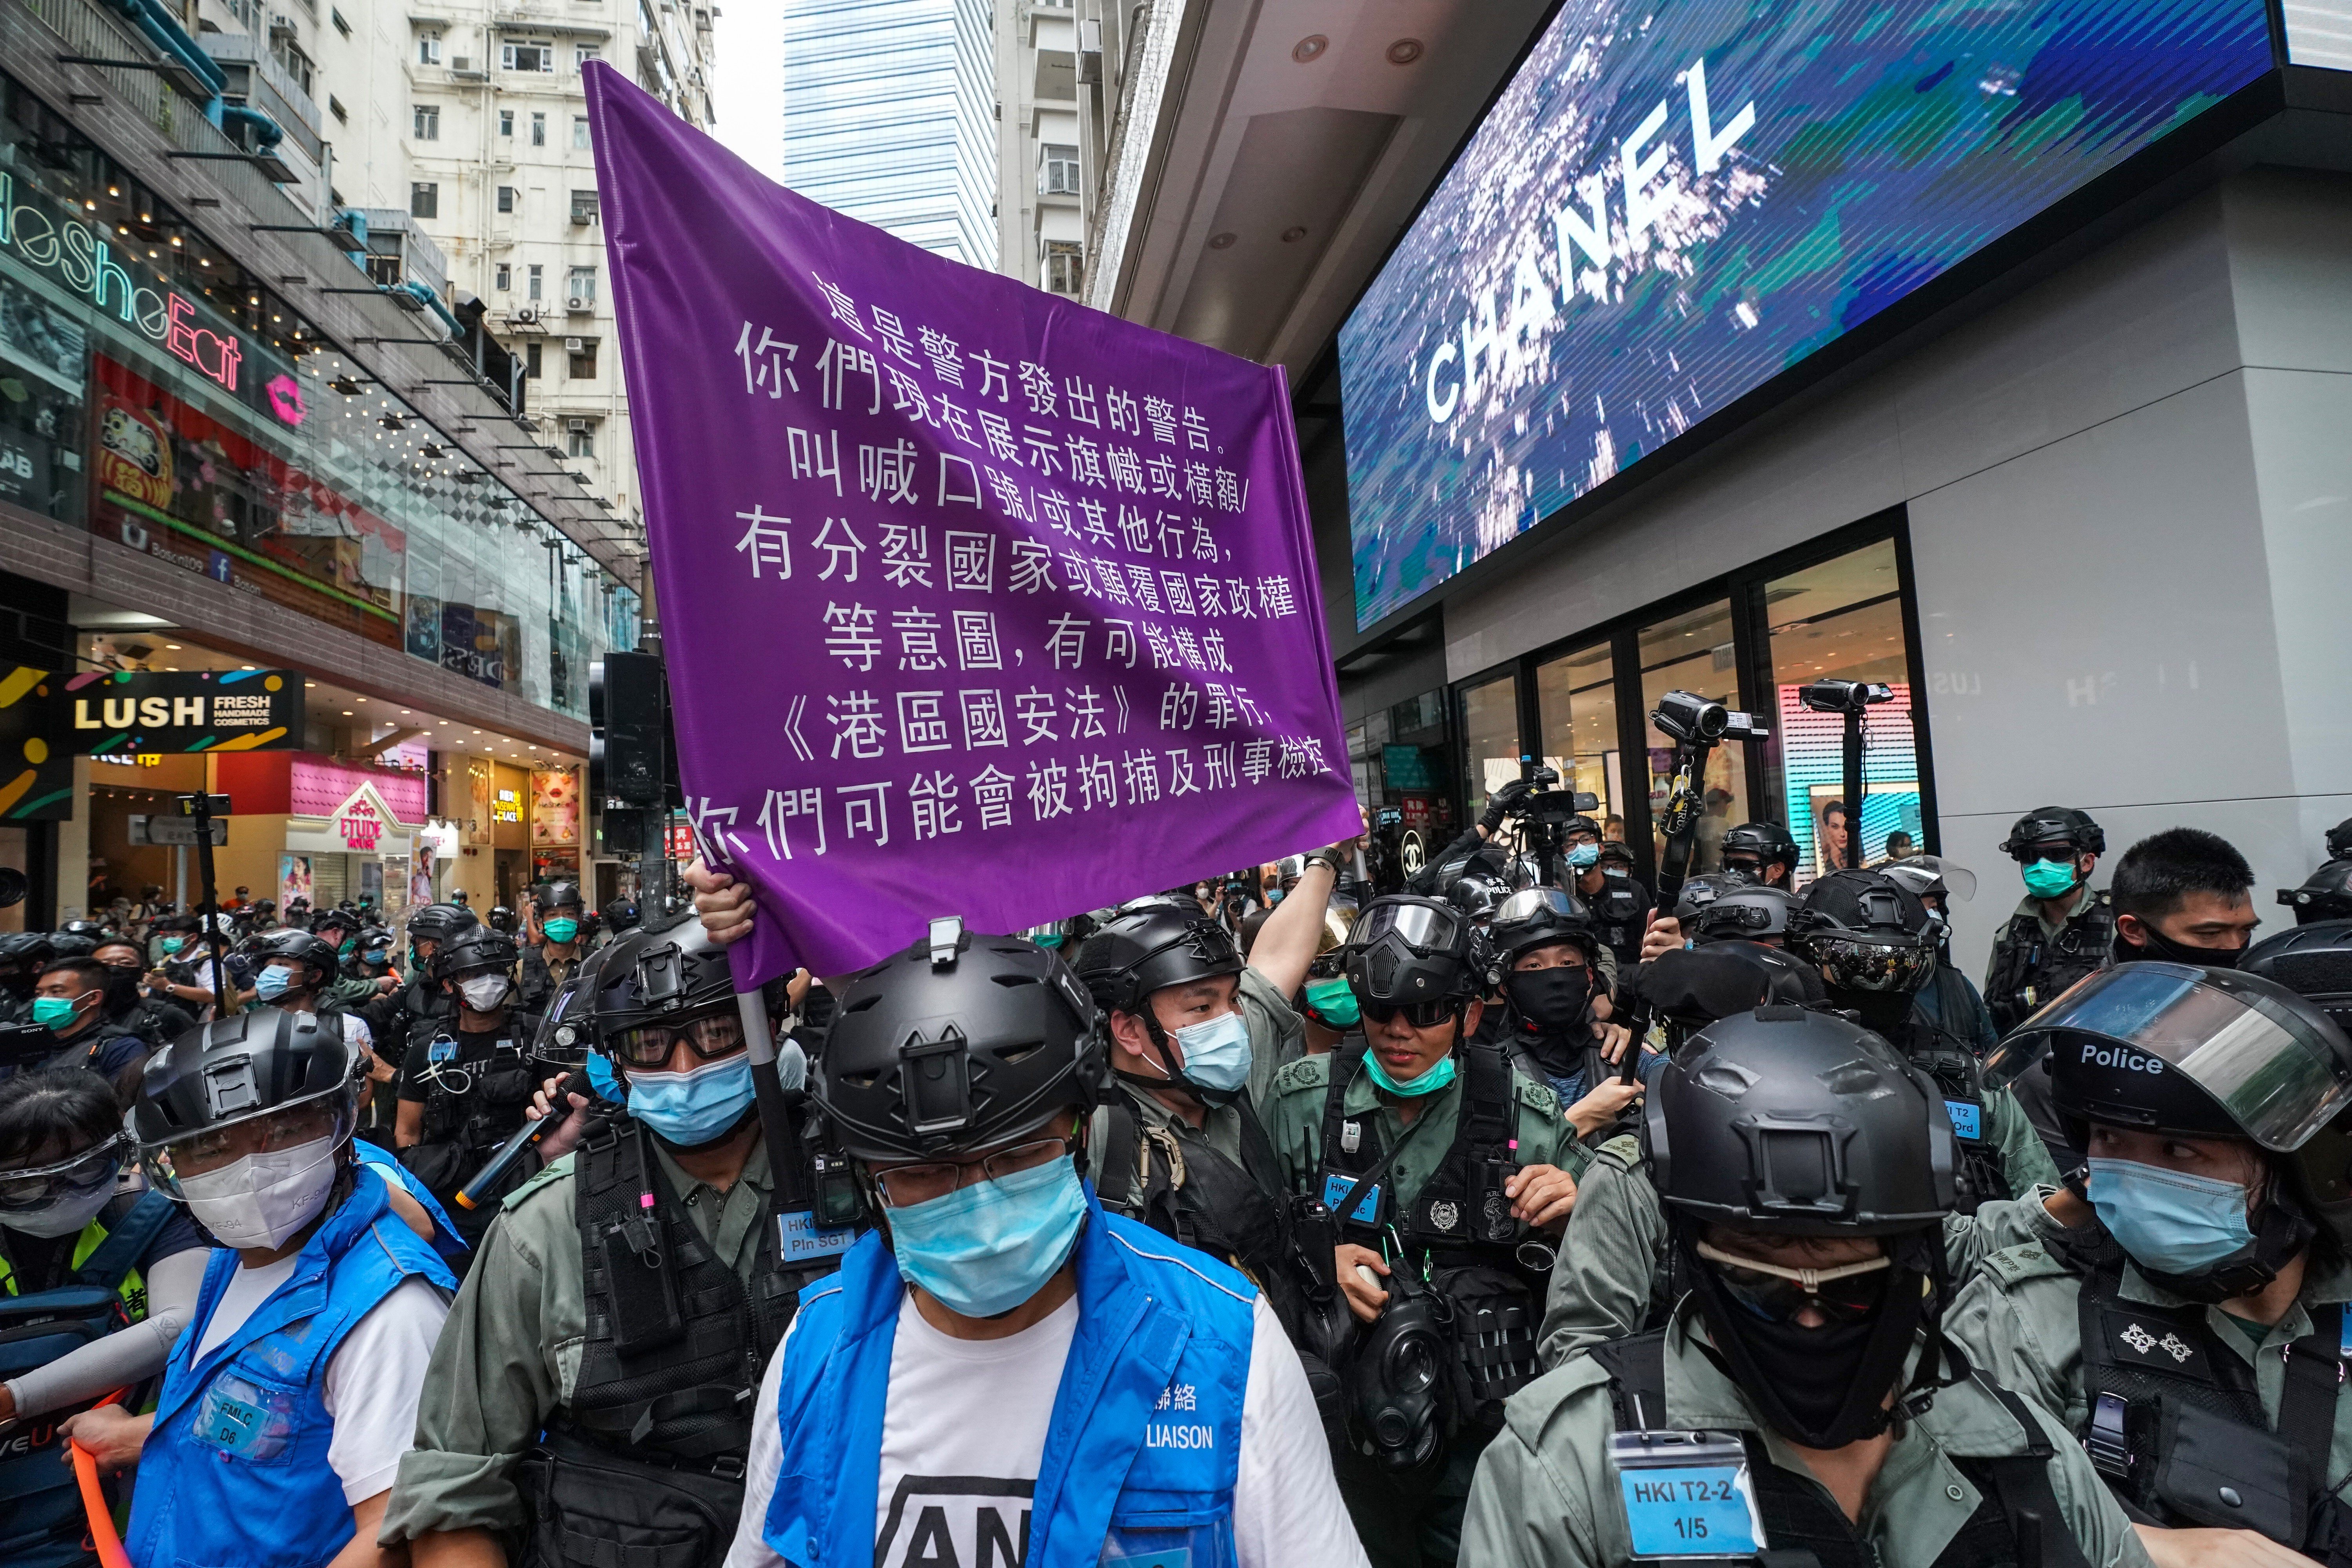 A Hong Kong police officer holds up a flag warning protesters they are violating the national security law, during a demonstration in Causeway Bay on July 1. Photo: Felix Wong